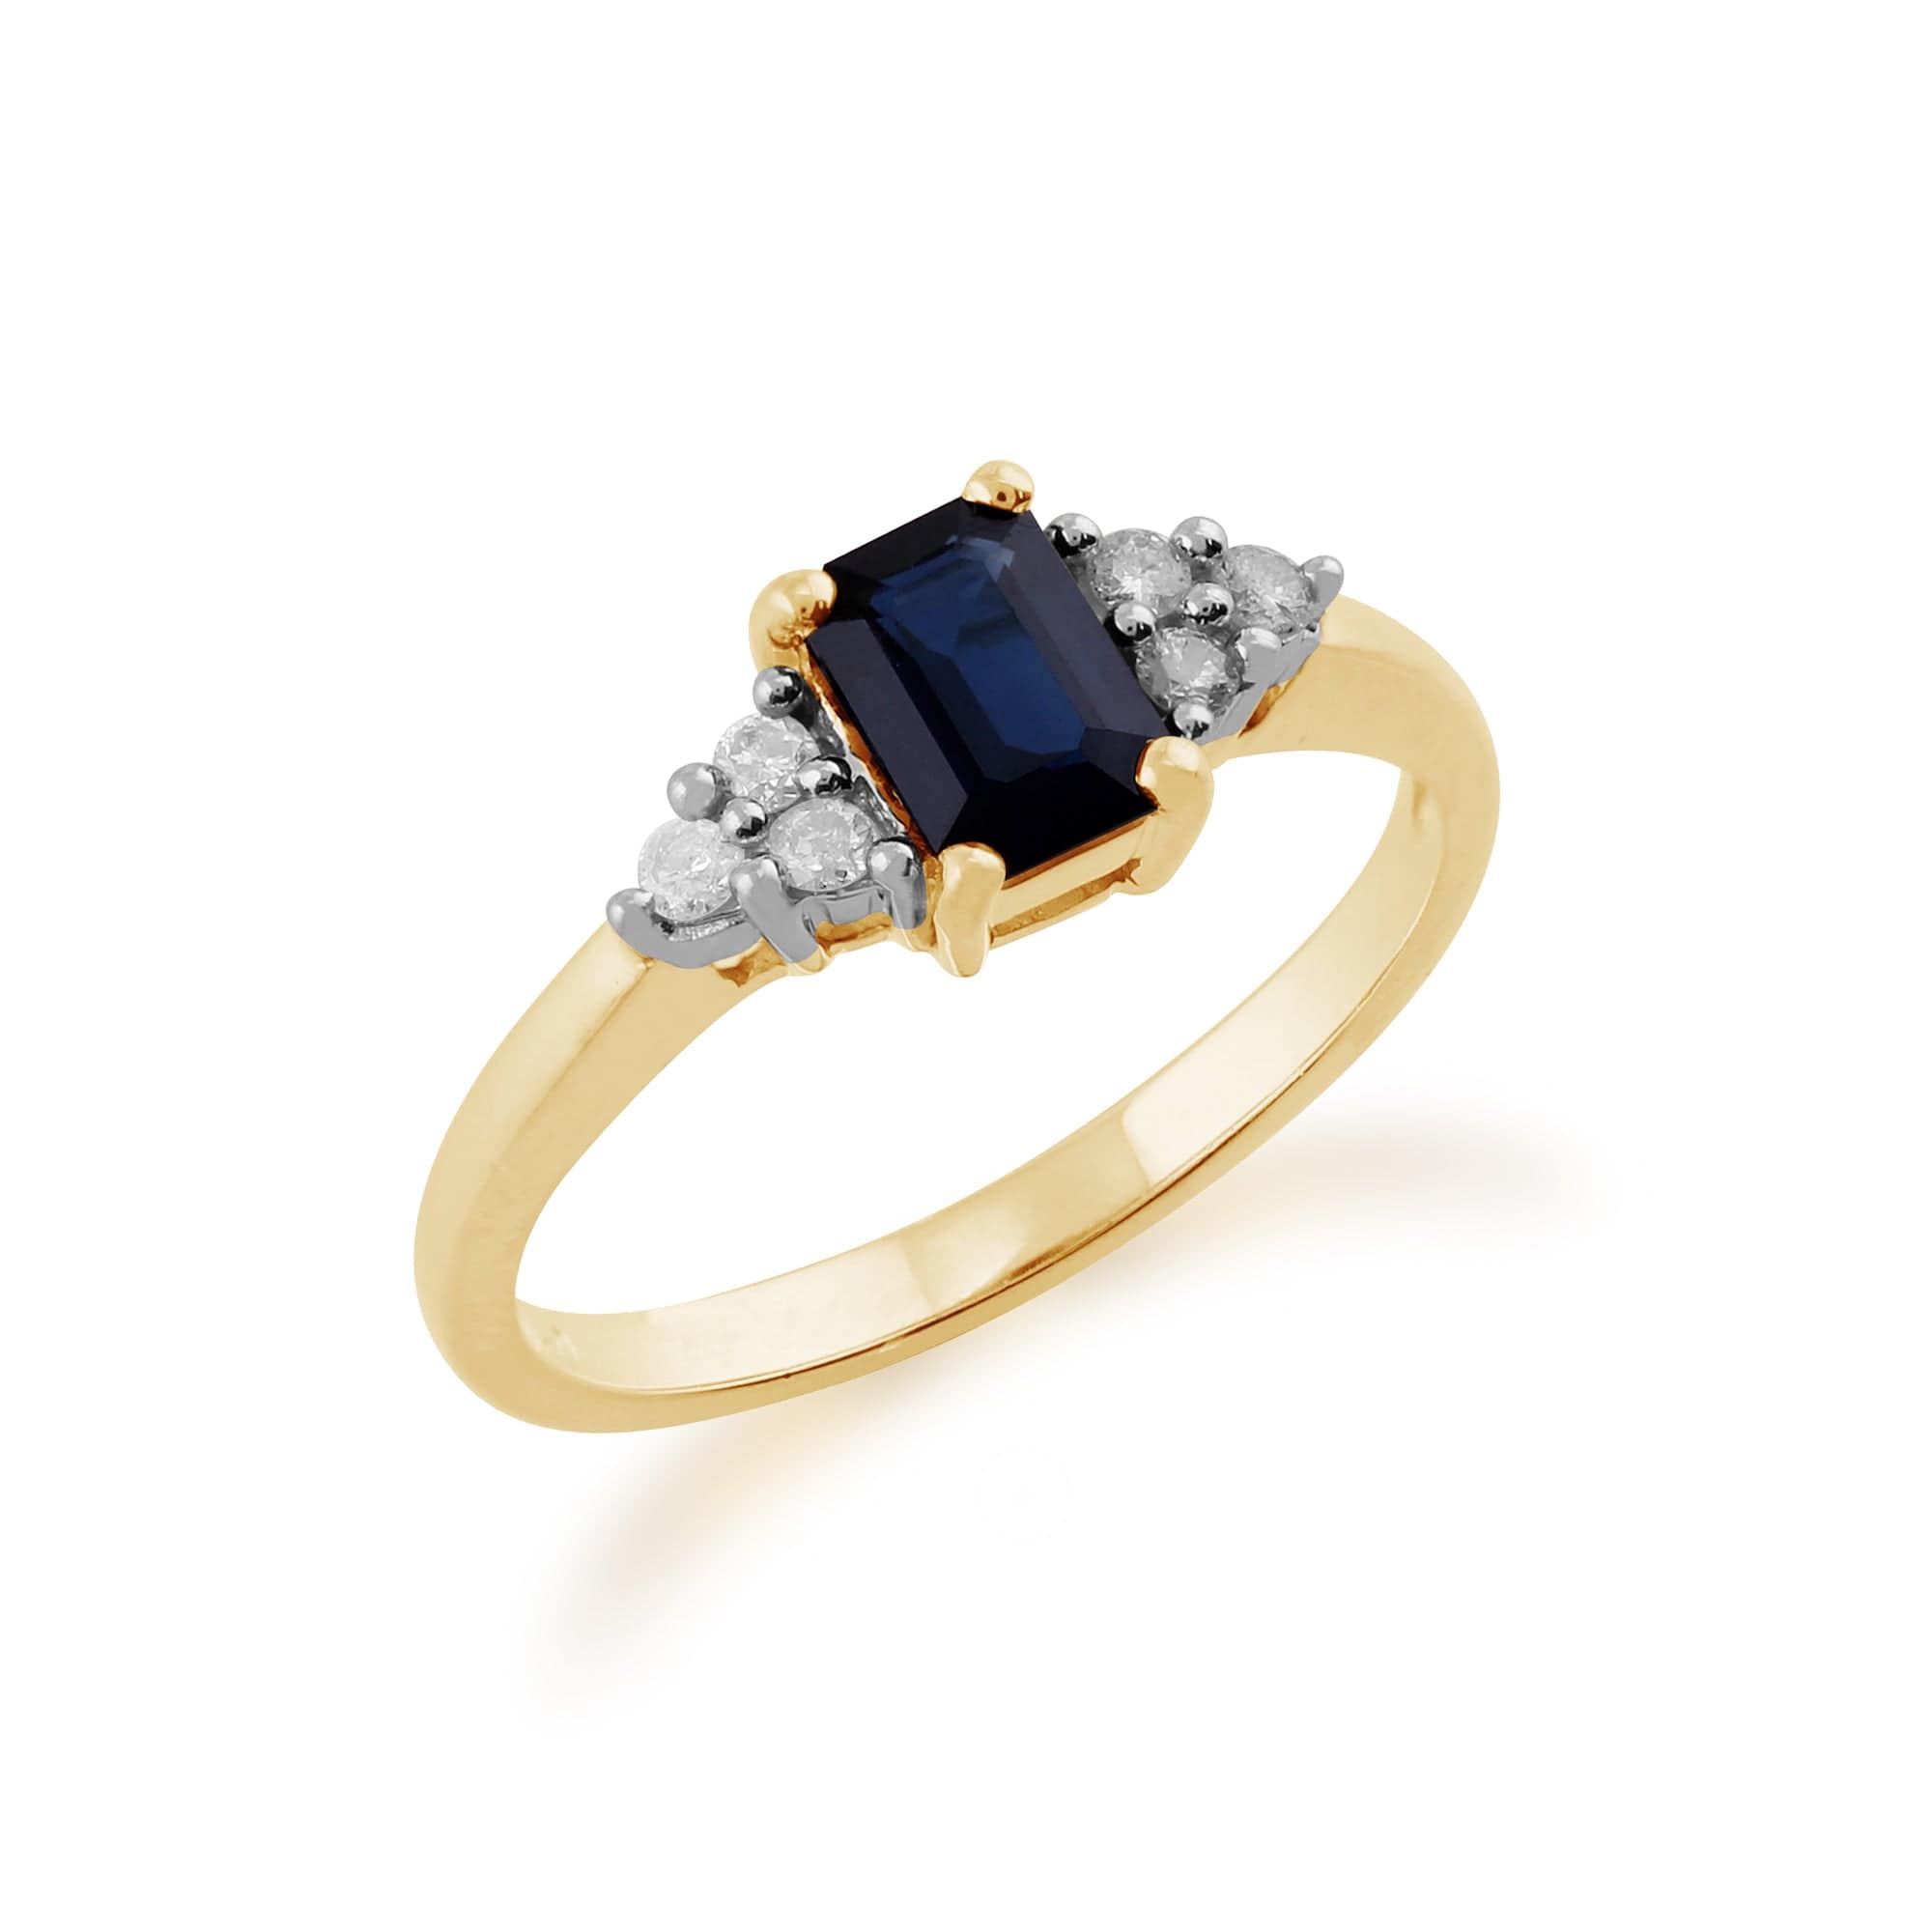 135R0486089 Classic Baguette Sapphire & Diamond Ring in 9ct Yellow Gold 2